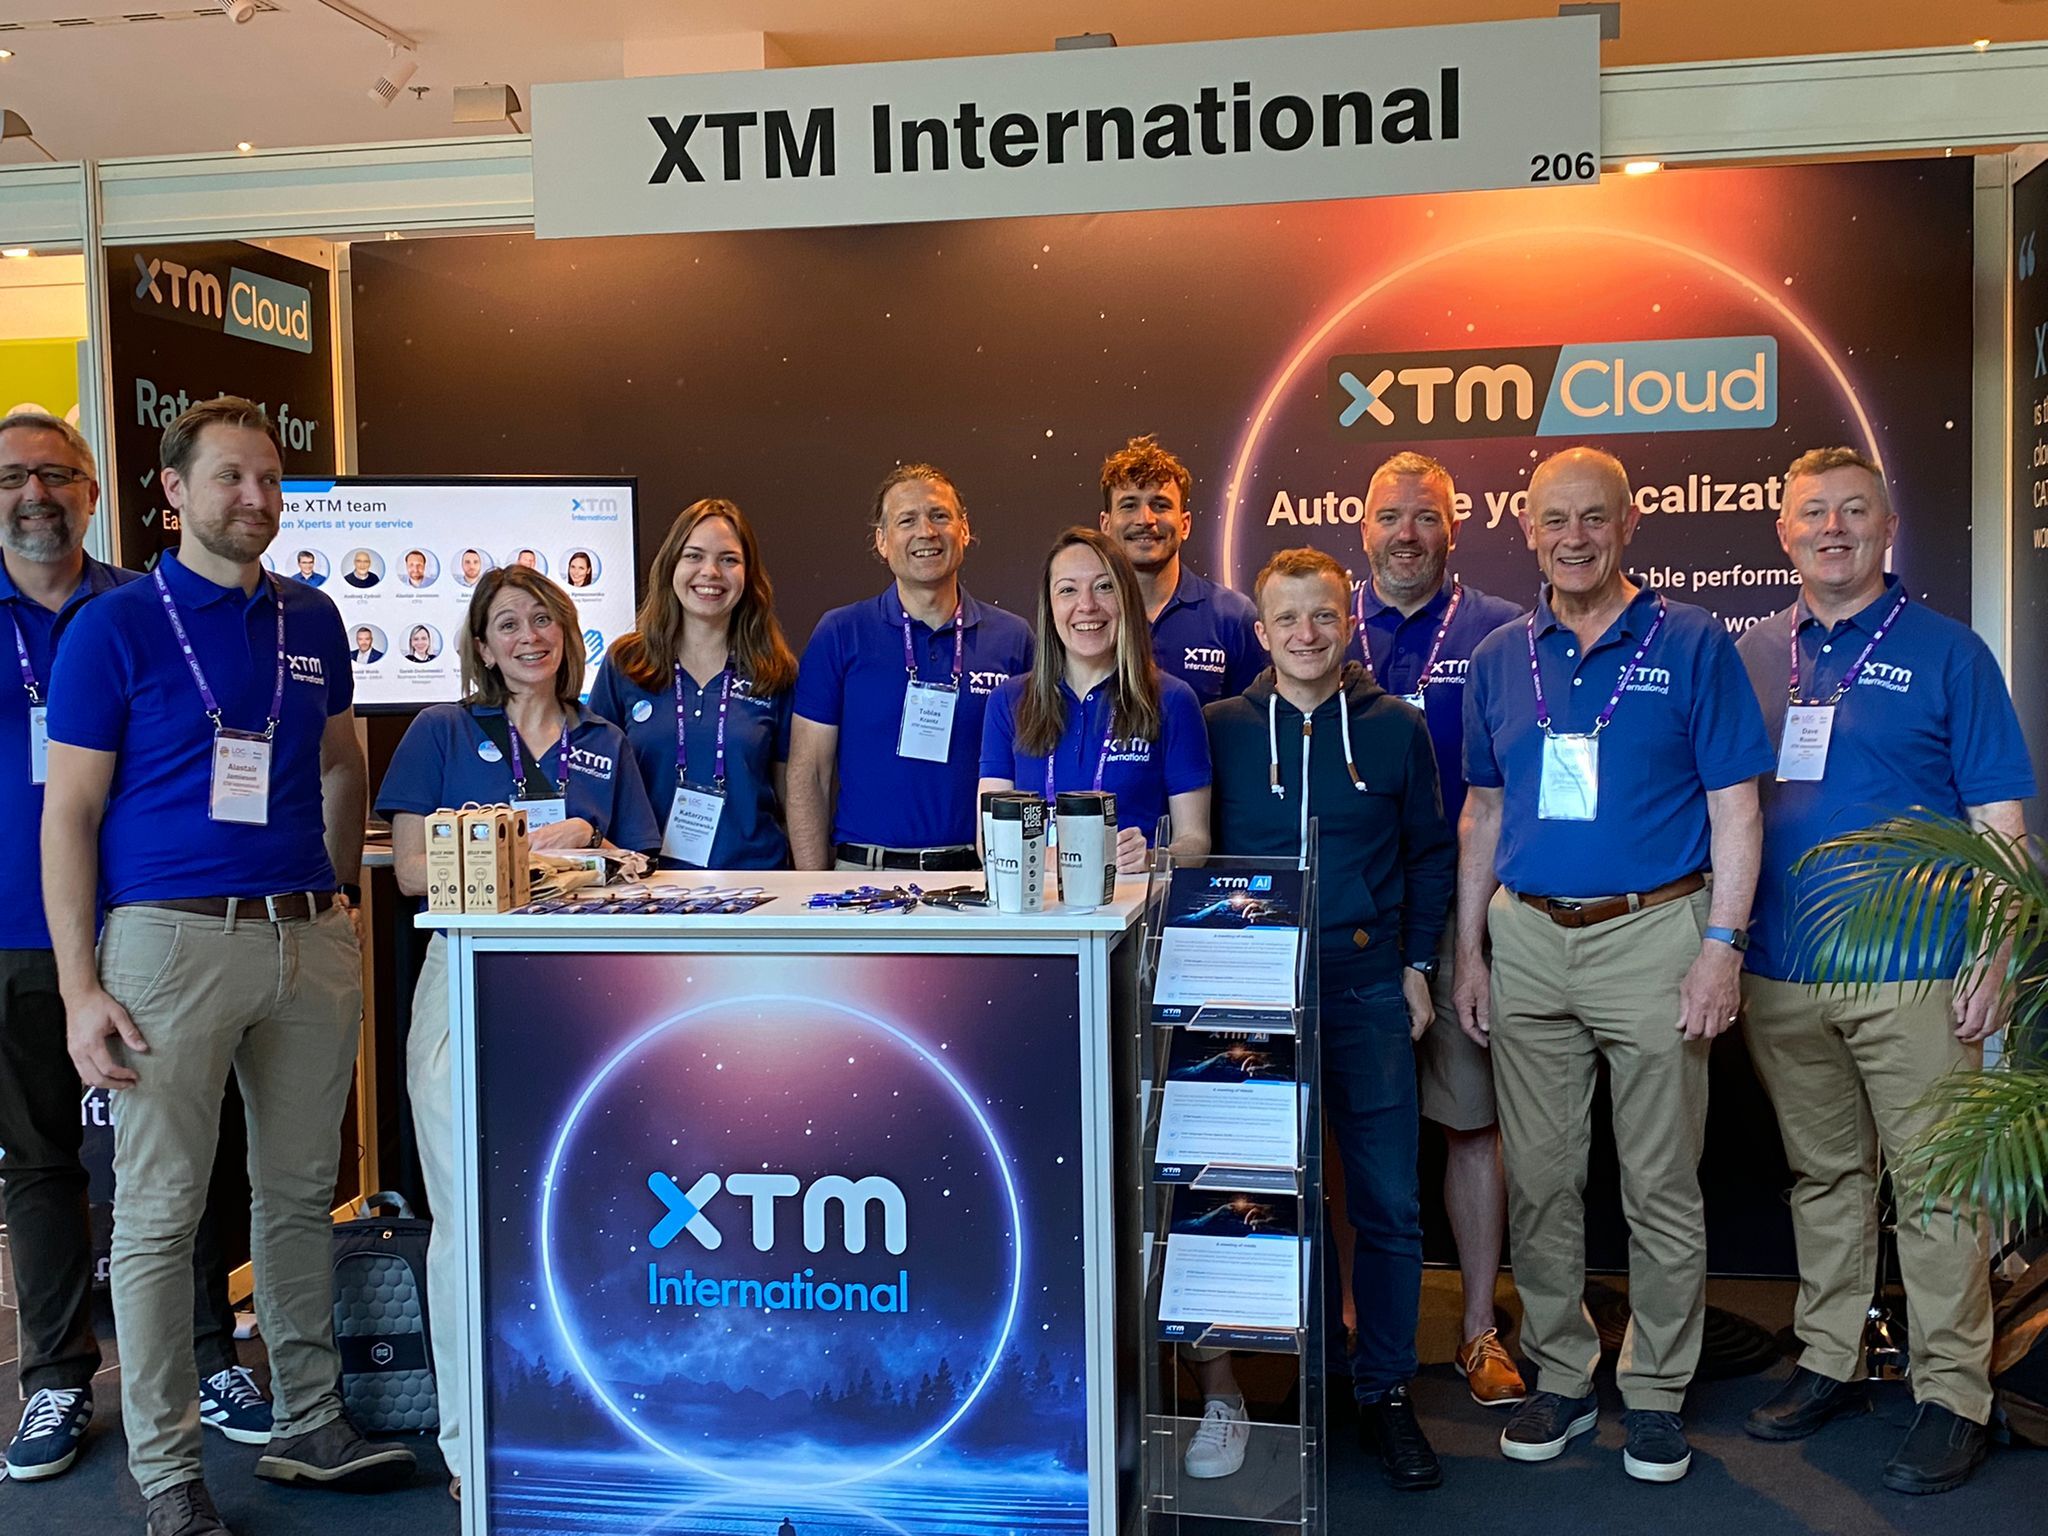 Some of the XTM team at LocWorld47 